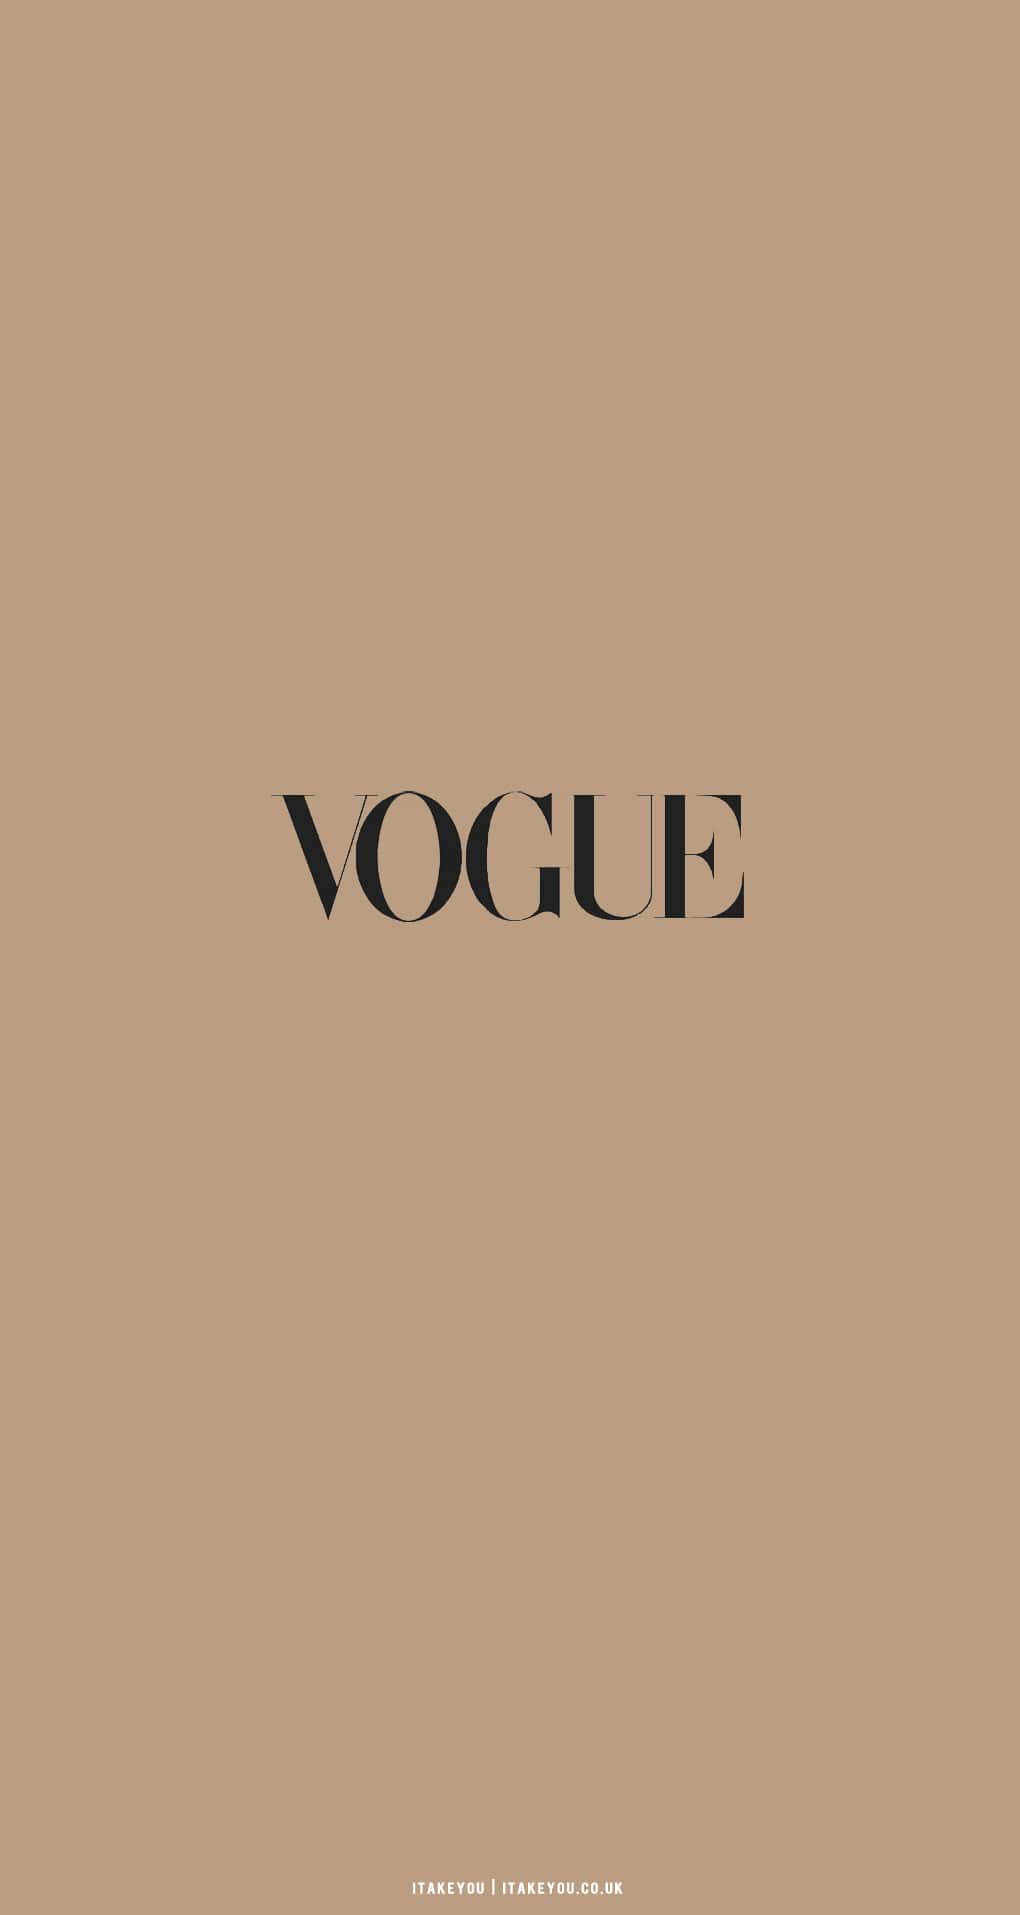 Vogue magazine cover with the word 'vouge' on it - Light brown, brown